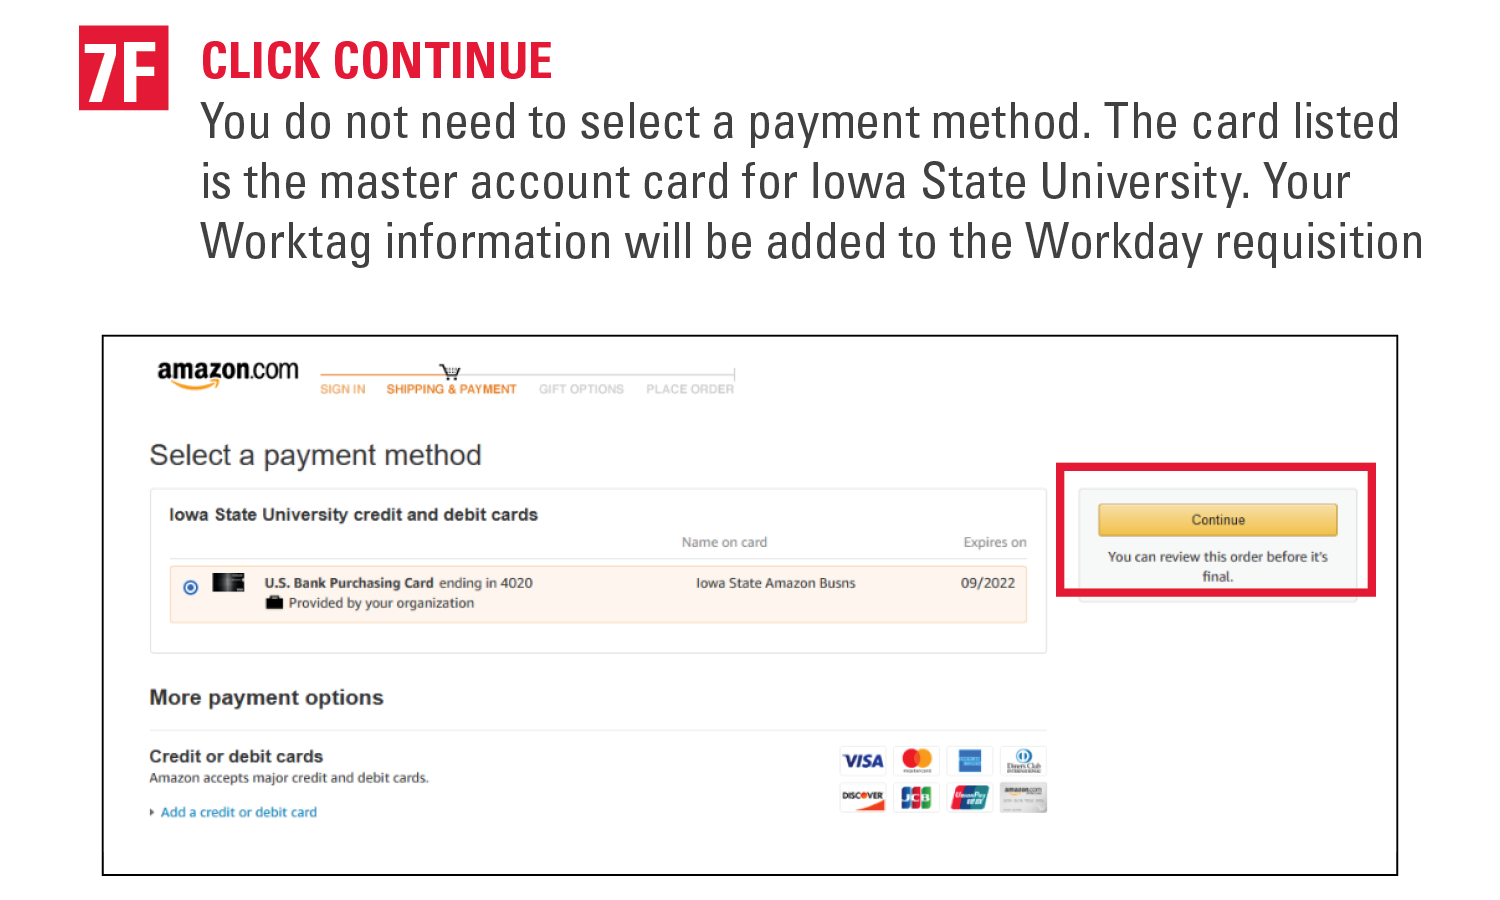 7f. Click continue. You do not need to select a payment method. The card listed is the master account card for Iowa State University. Your Worktag information will be added to the Workday requisition